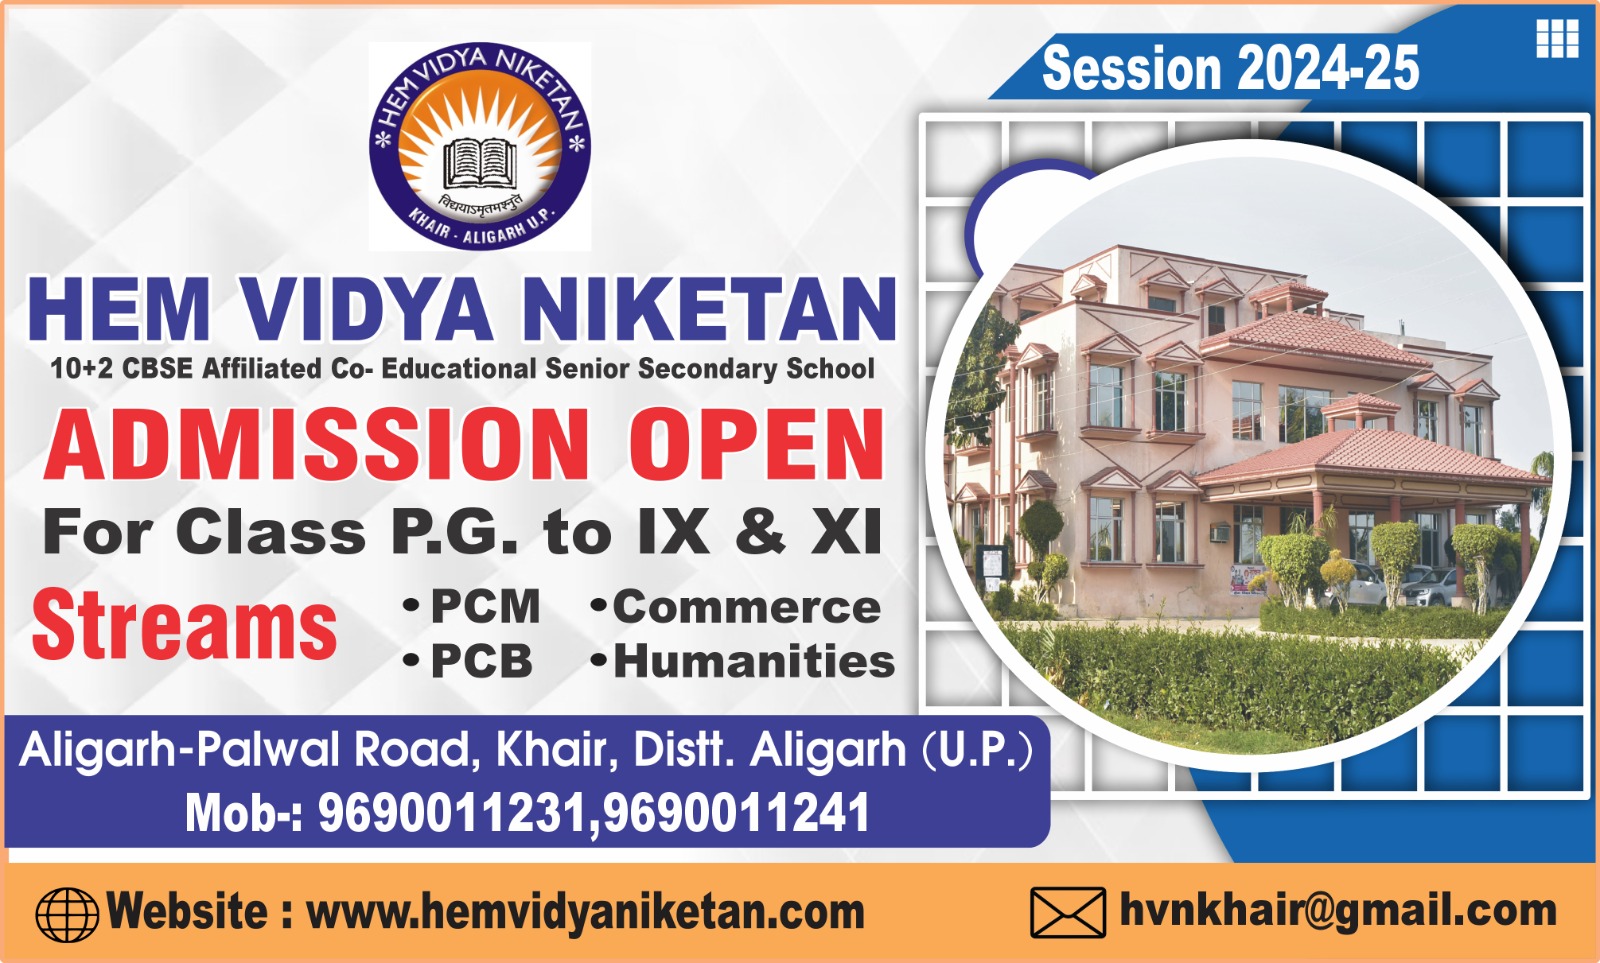 Admission-open24-25